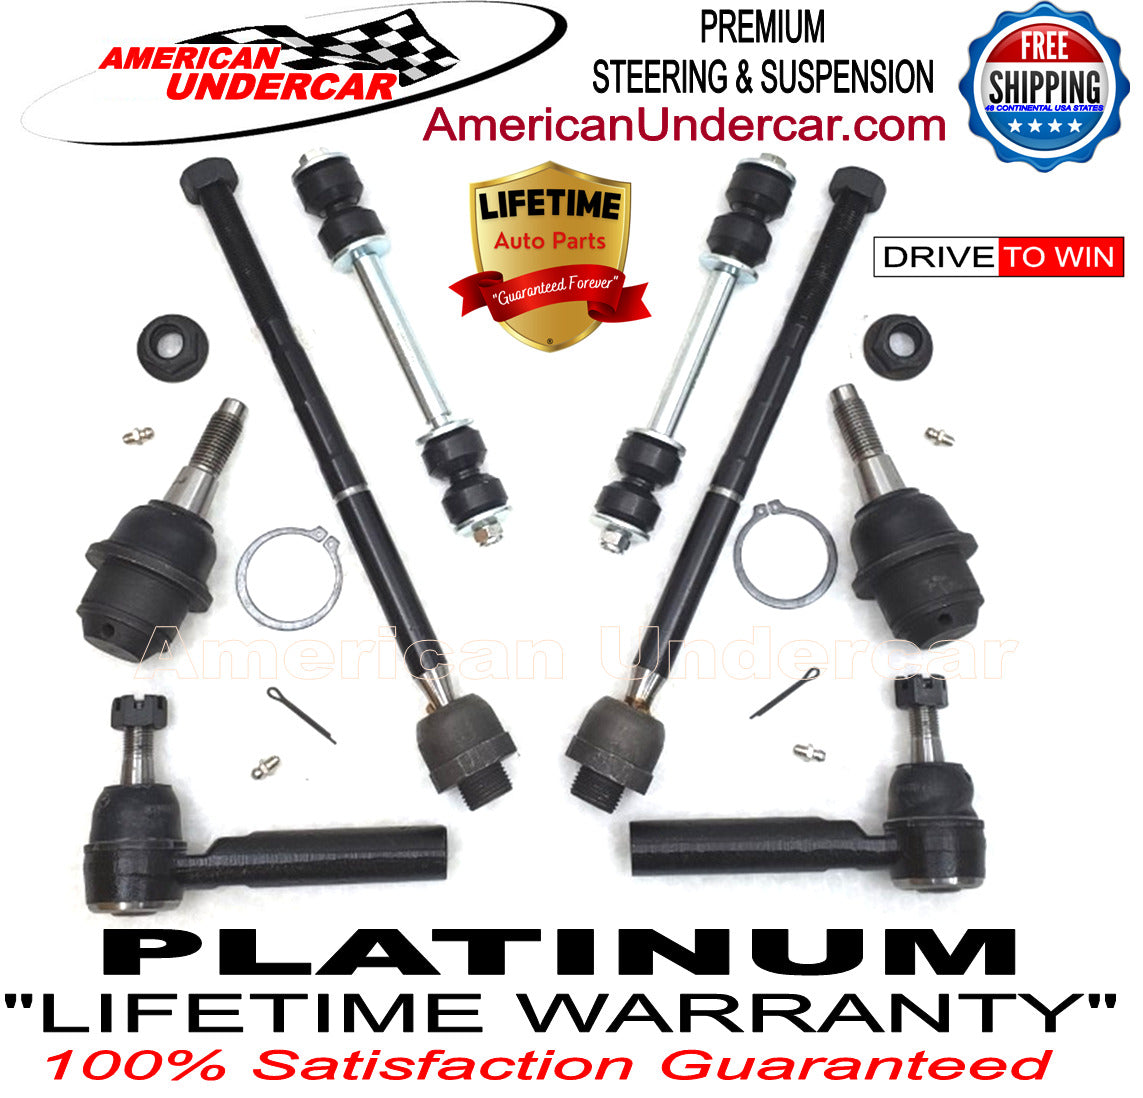 Lifetime Ball Joint Tie Rod Link Steering Kit for 2014-2018 Chevrolet, GMC, Cadillac 2WD, 4x4